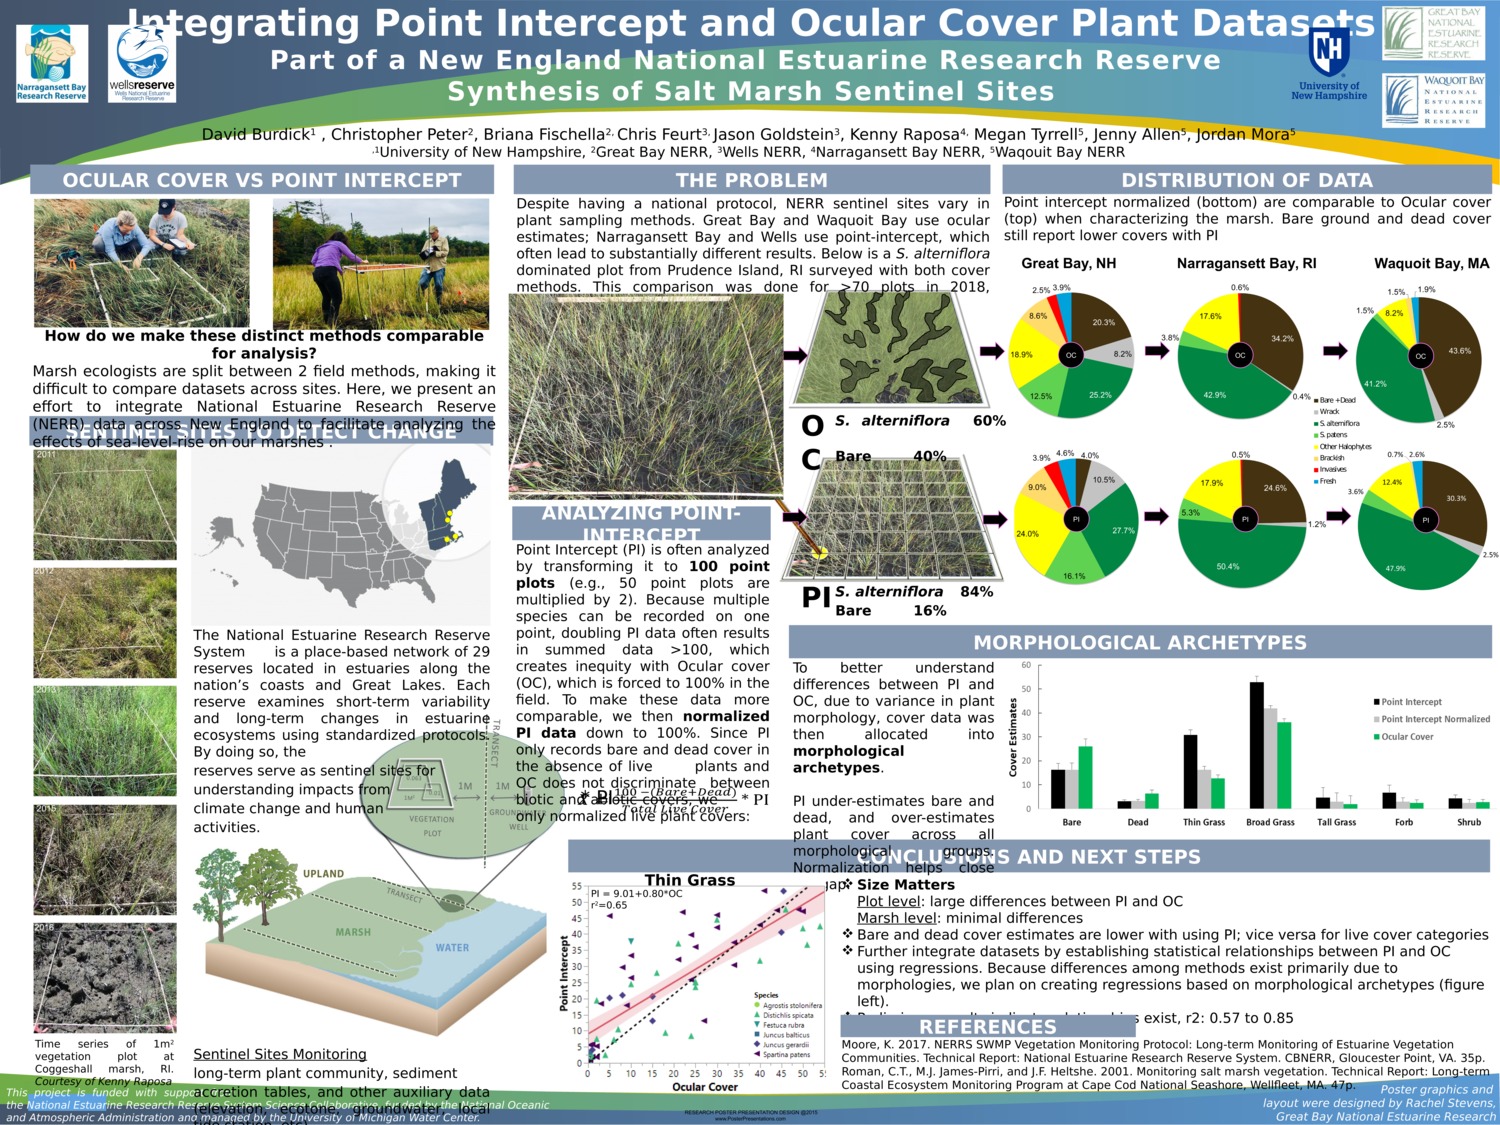 Integrating Point Intercept And Ocular Cover Plant Datasets Part Of A New England National Estuarine Research Reserve Synthesis Of Salt Marsh Sentinel Sites by crp